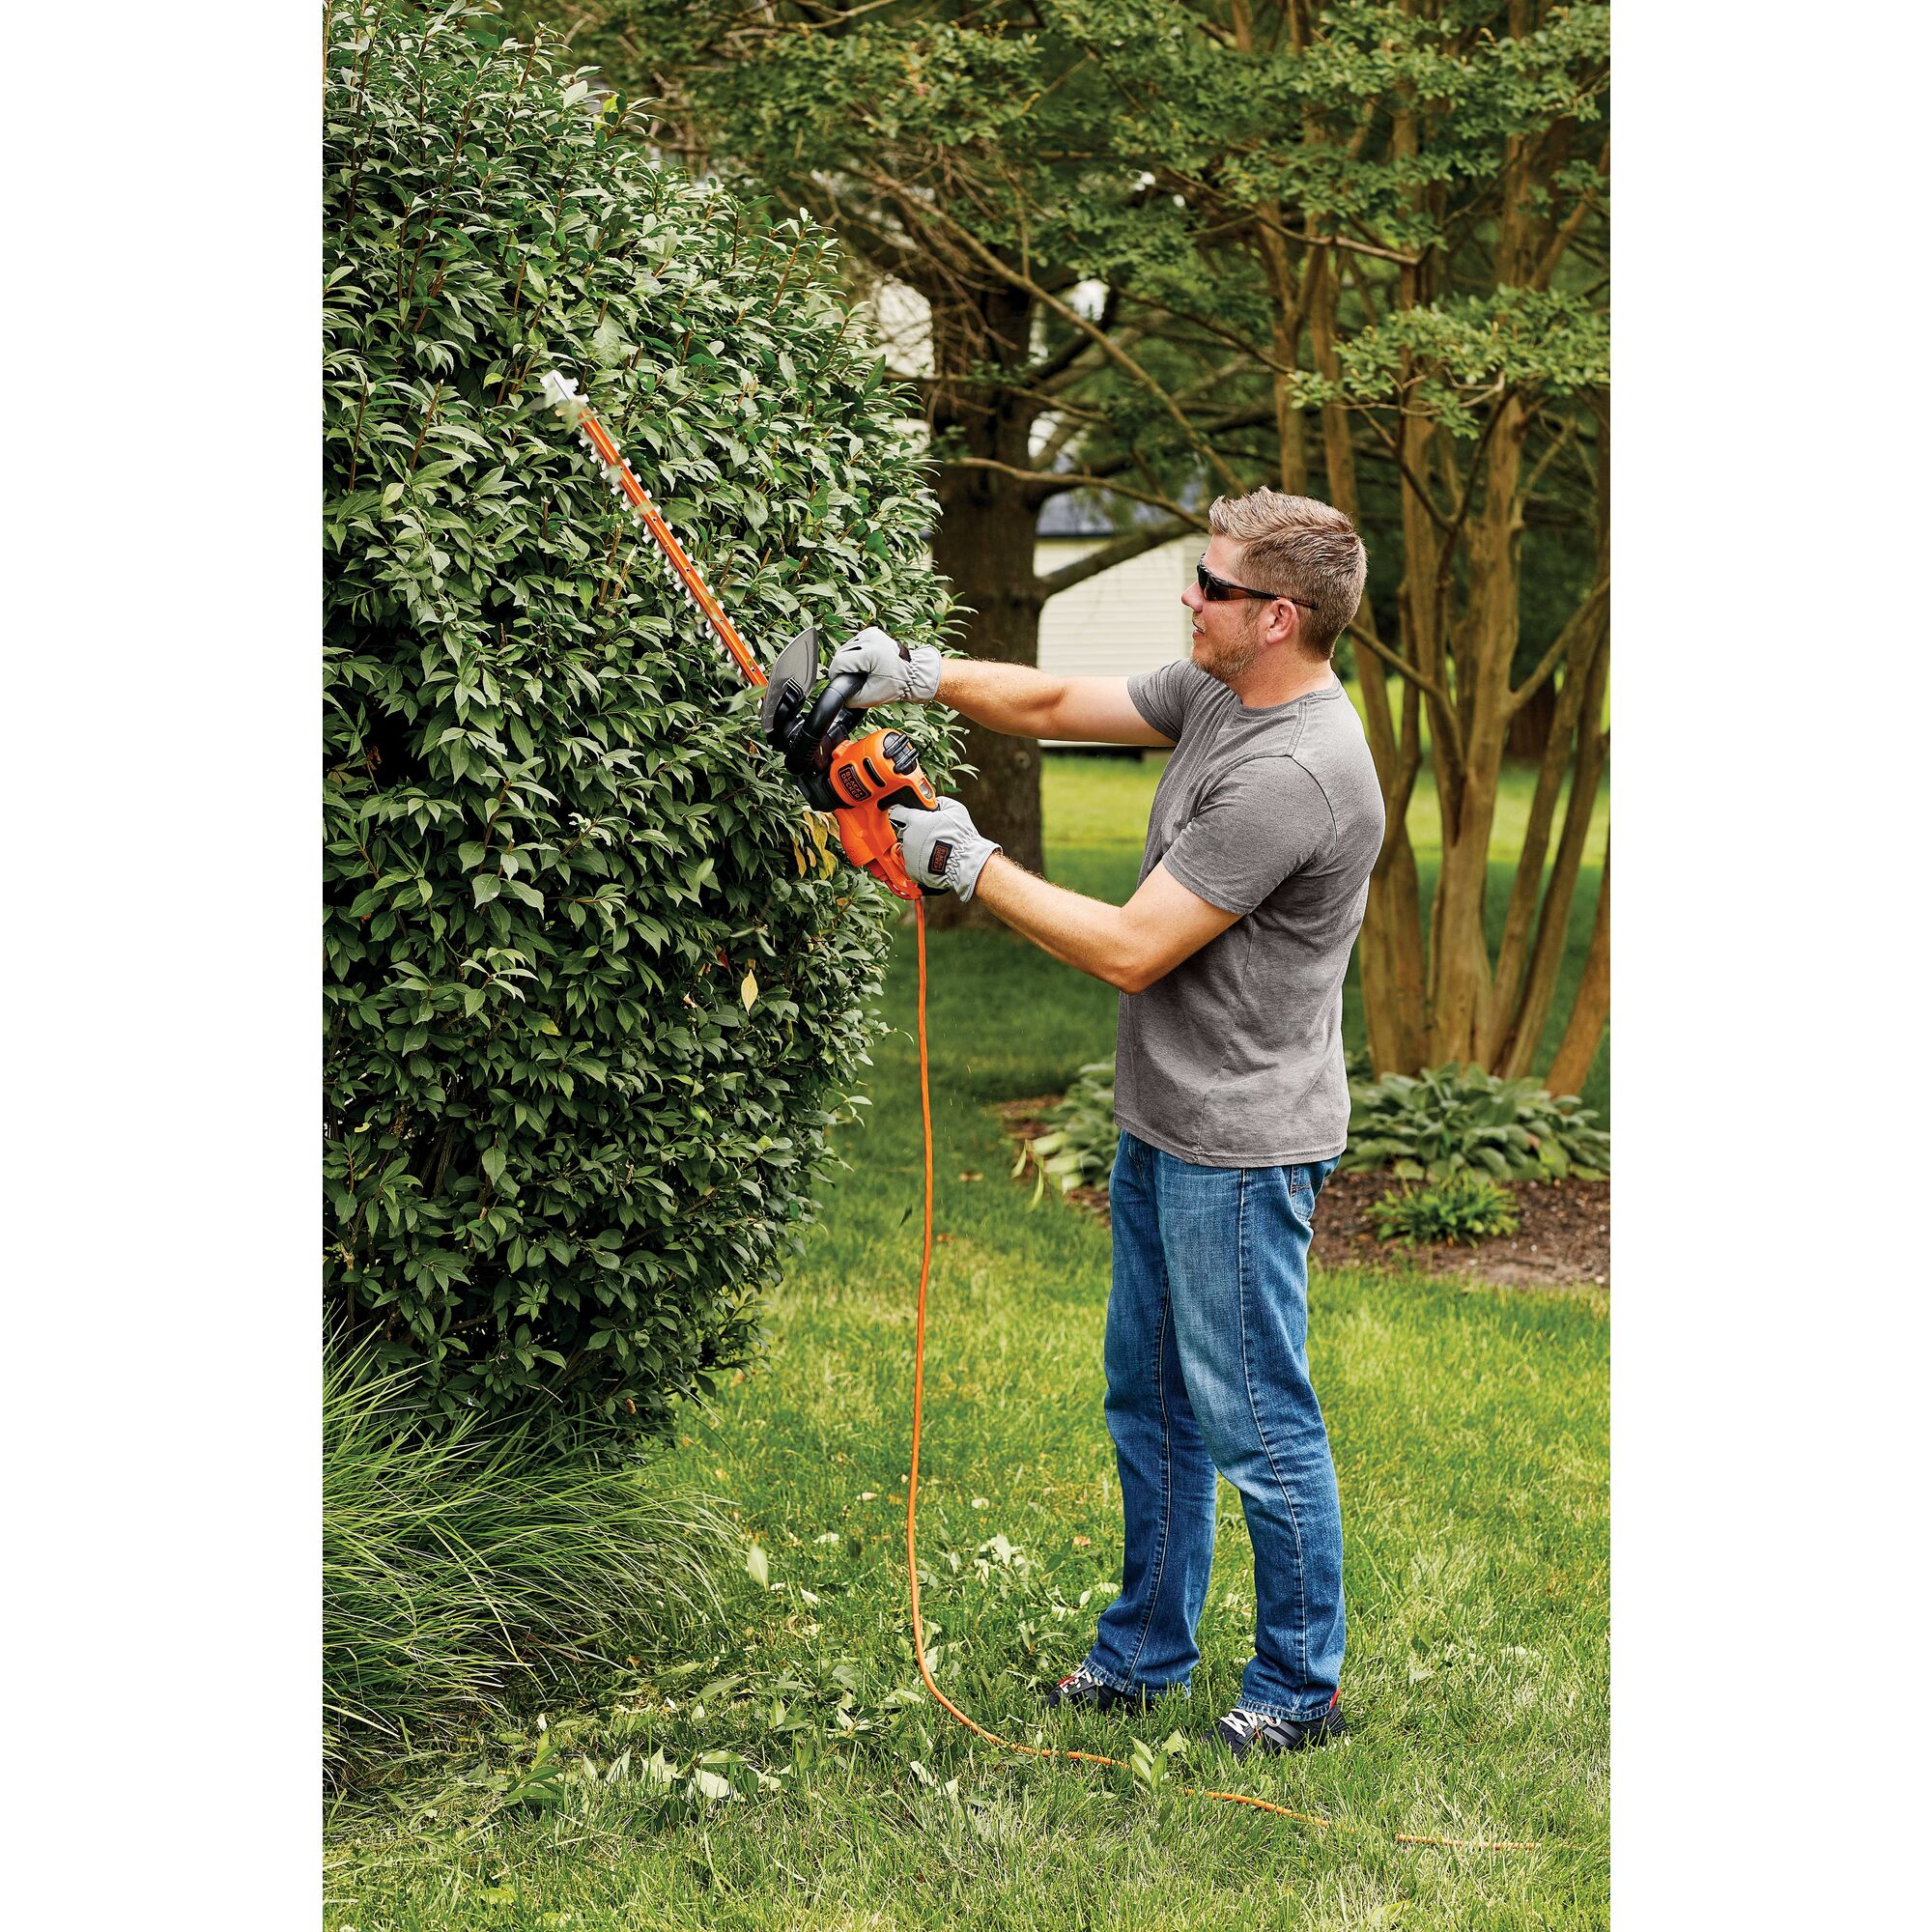 22 inch saw blade electric hedge trimmer being used by a person.